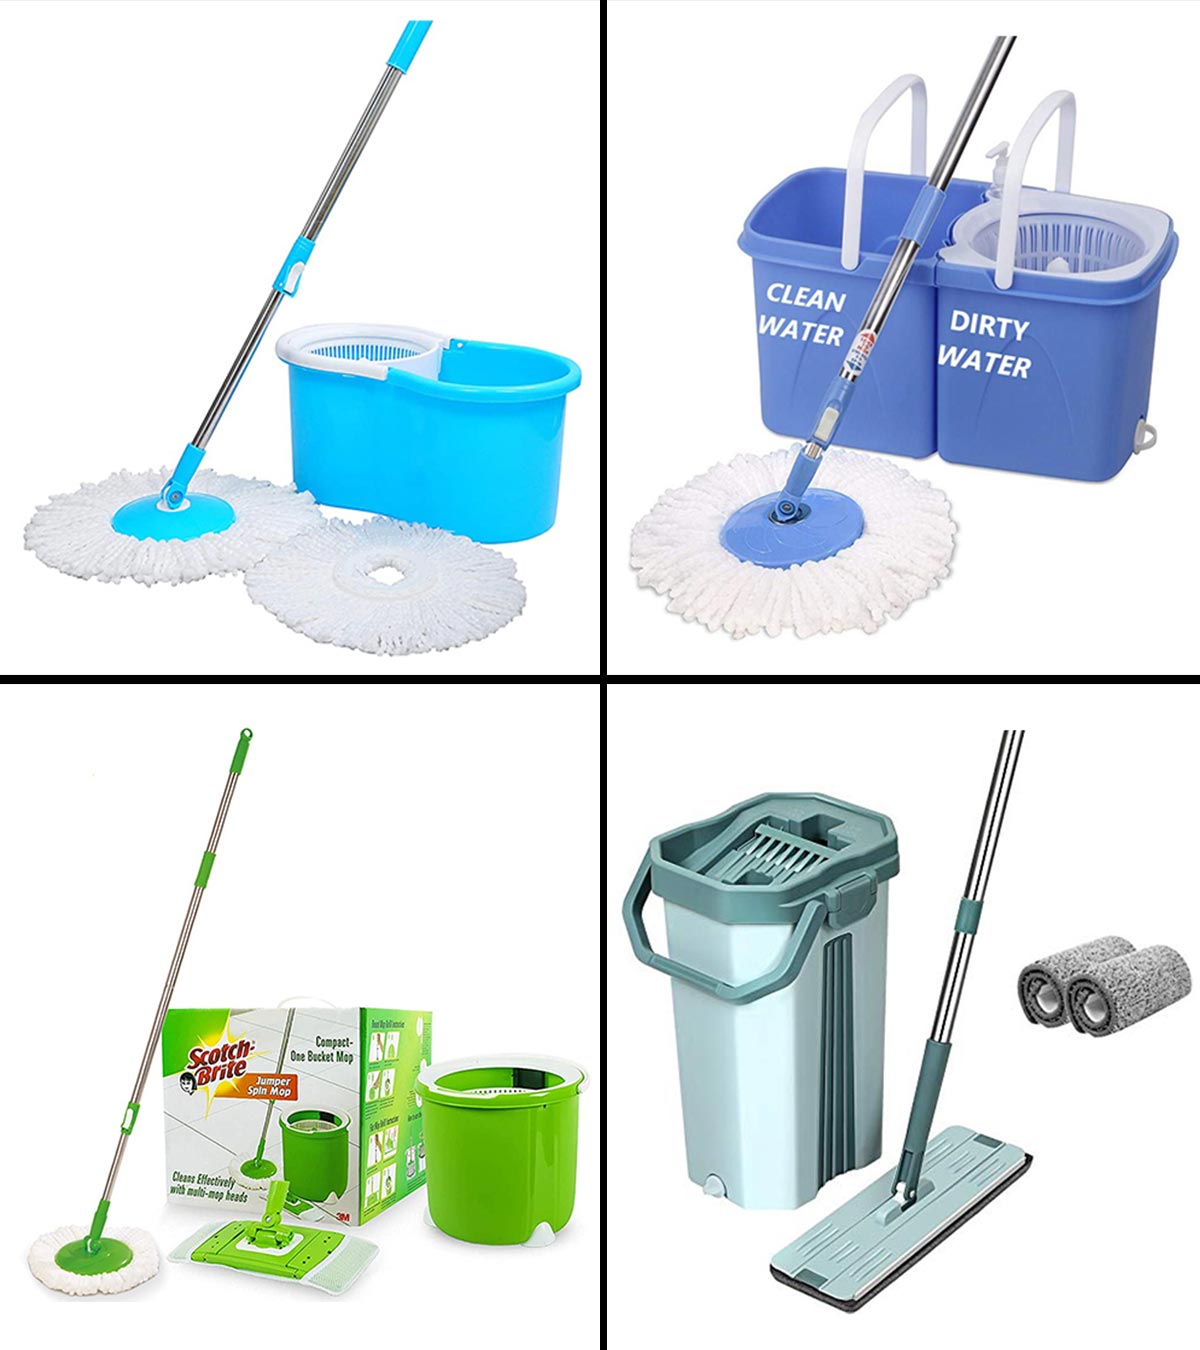 Green 360 Spin Mop with Bucket Floor Cleaning System Included EasyPress Handle with 2 Cotton Heads for Replacement 